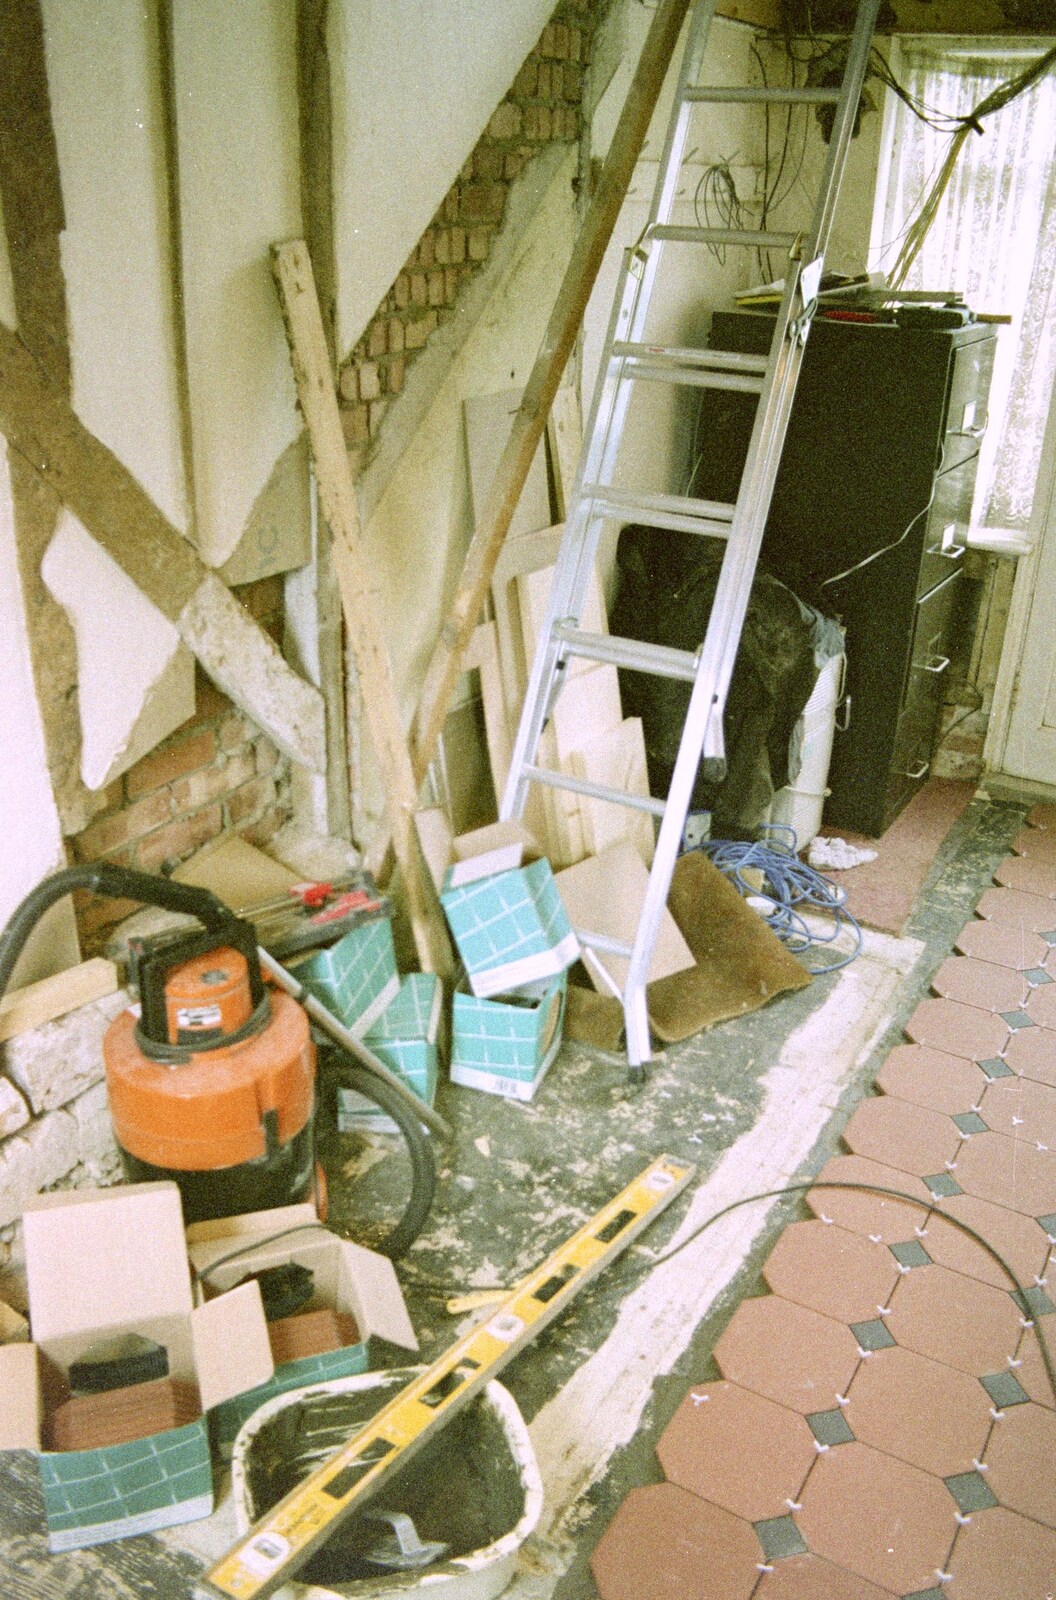 A pile of tile boxes where the old stairs were from 3G Lab, and Building a Staircase, Brome, Suffolk - 11th February 2001